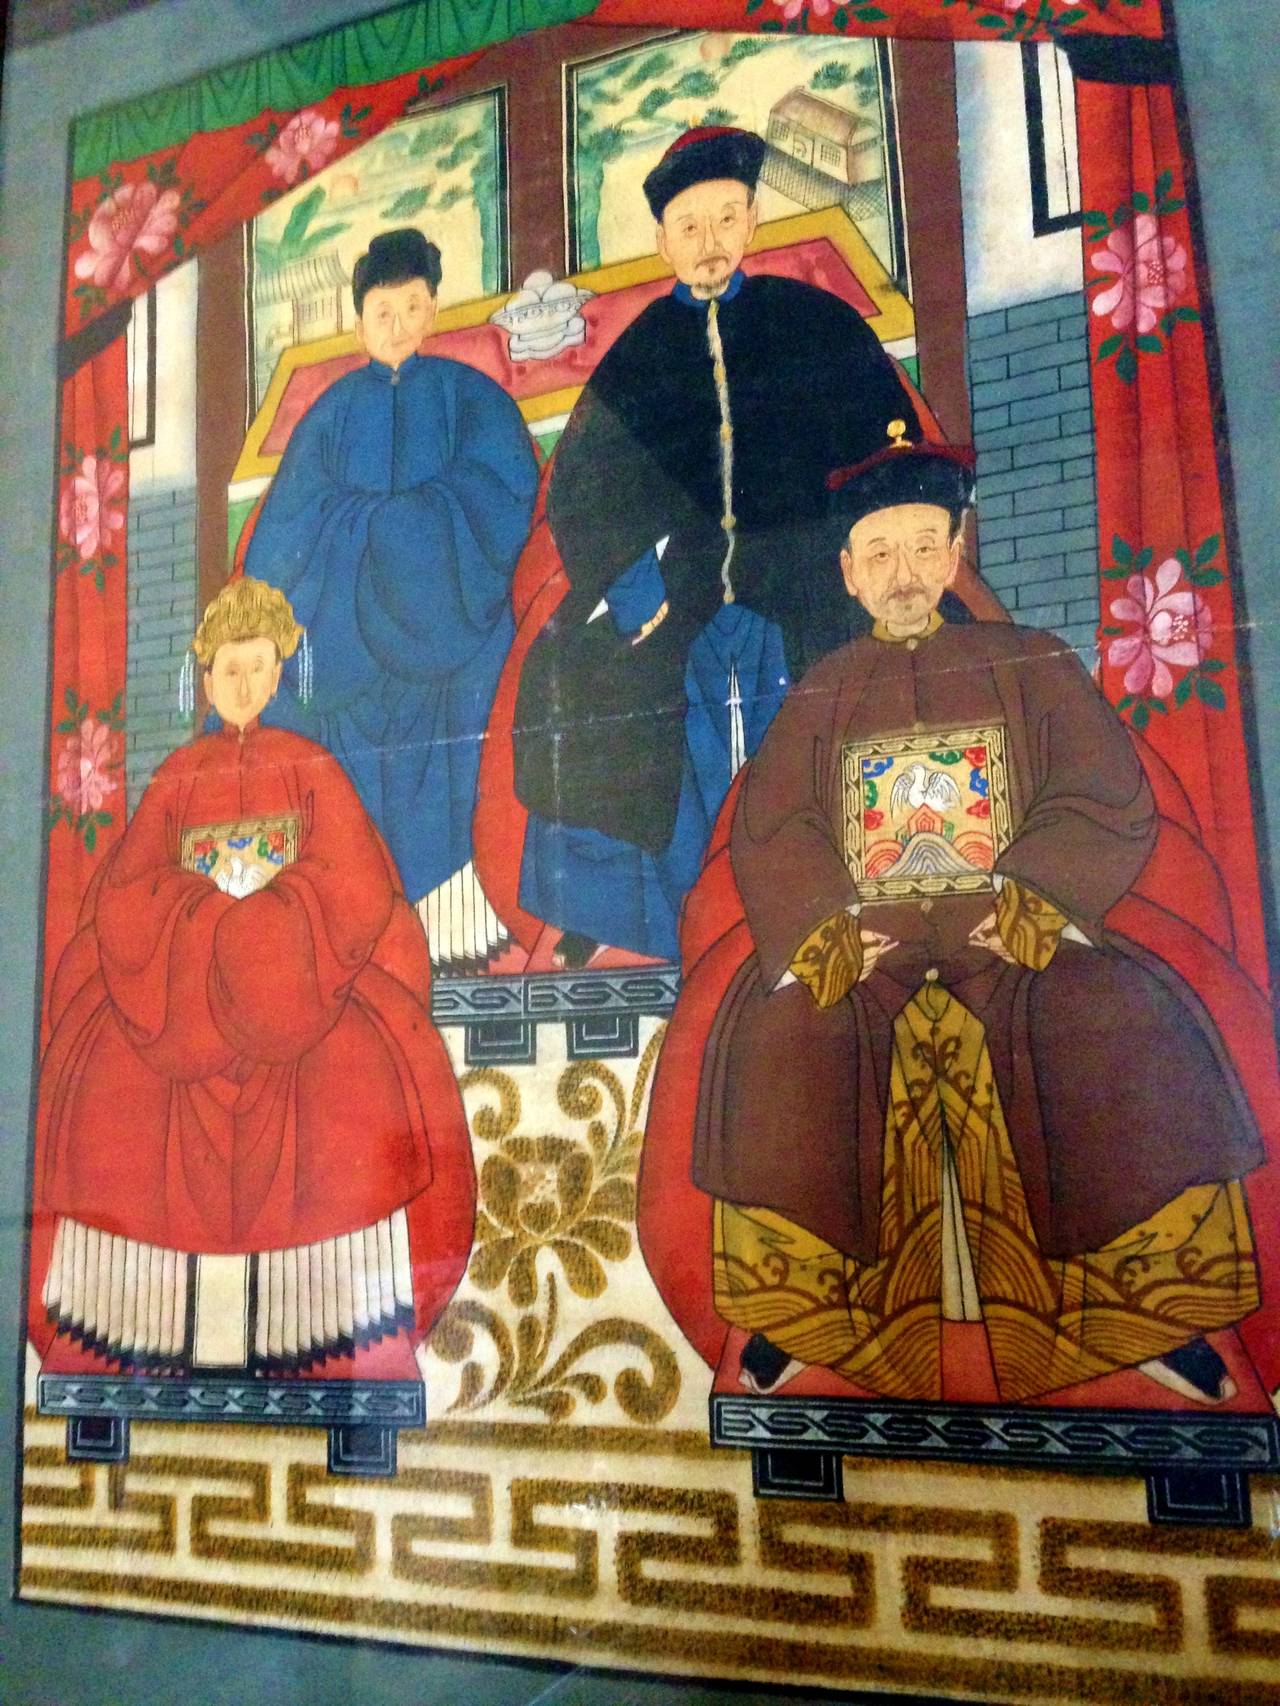 This is an authentic, NOT EXPORT, original, 19th century Chinese family portrait that is hand painted on canvas, colored using natural ingredients, such as lapis and saffron. Genuine lapis lazuli stone was grounded to generate the gorgeous blue